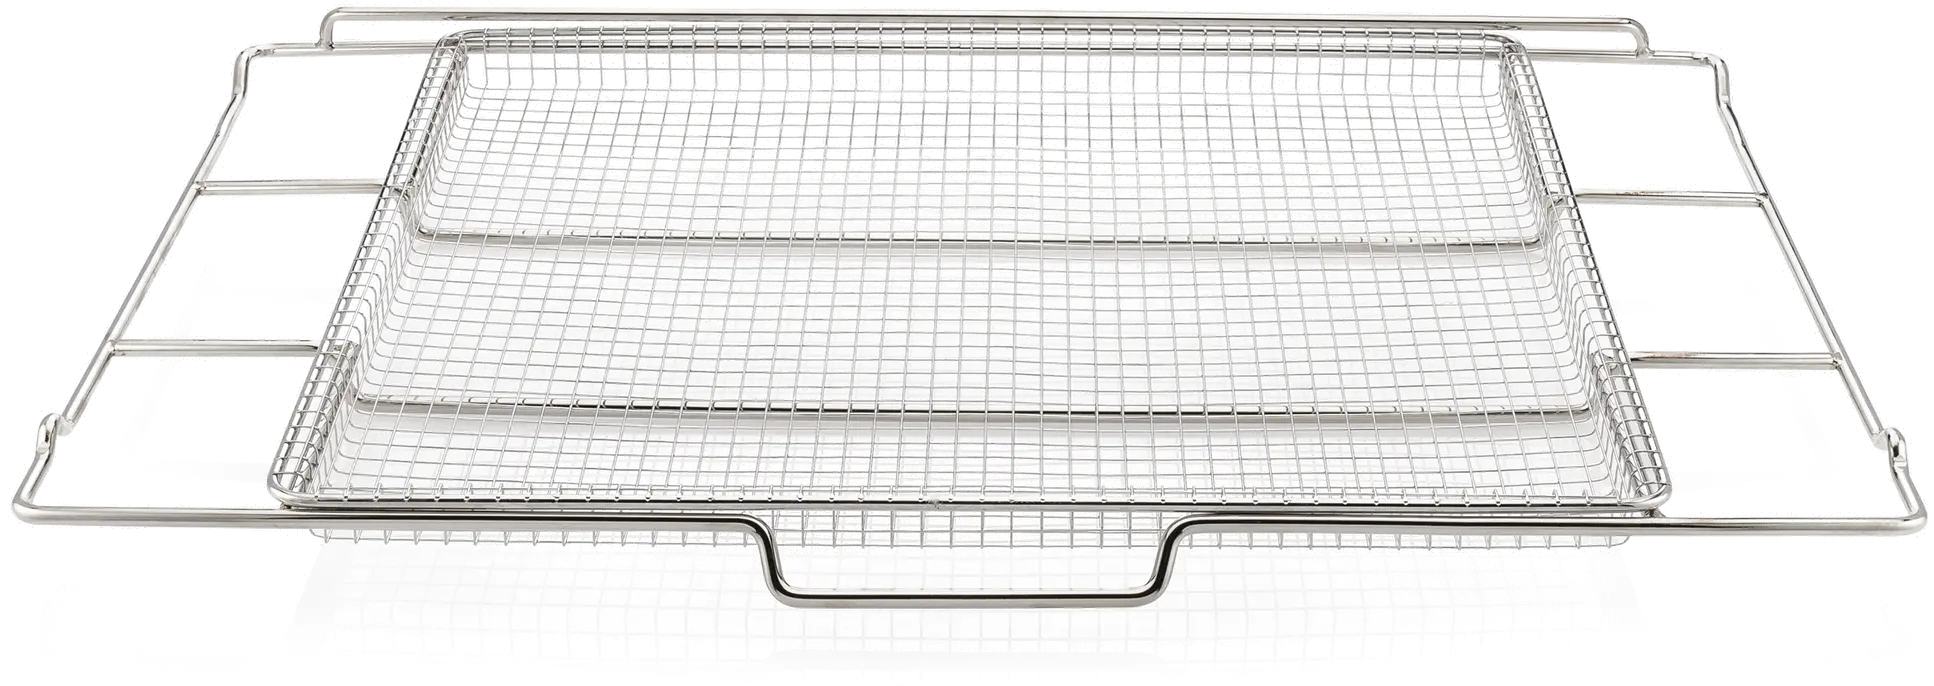 https://static.rcwilley.com/products/112587119/Frigidaire-Air-Fry-Tray-rcwilley-image1.webp